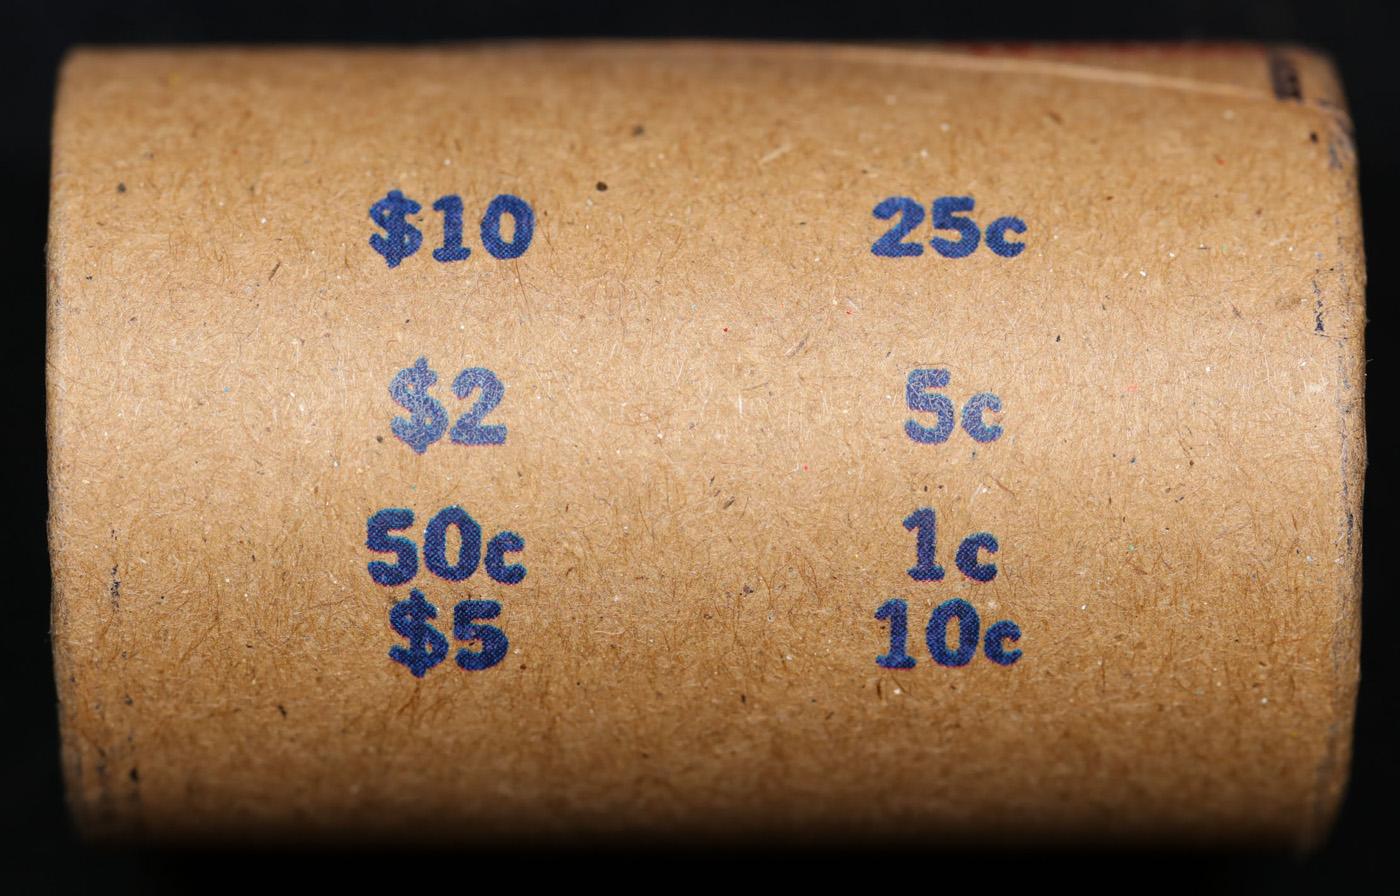 High Value! - Covered End Roll - Marked " Morgan Standard" - Weight shows x20 Coins (FC)